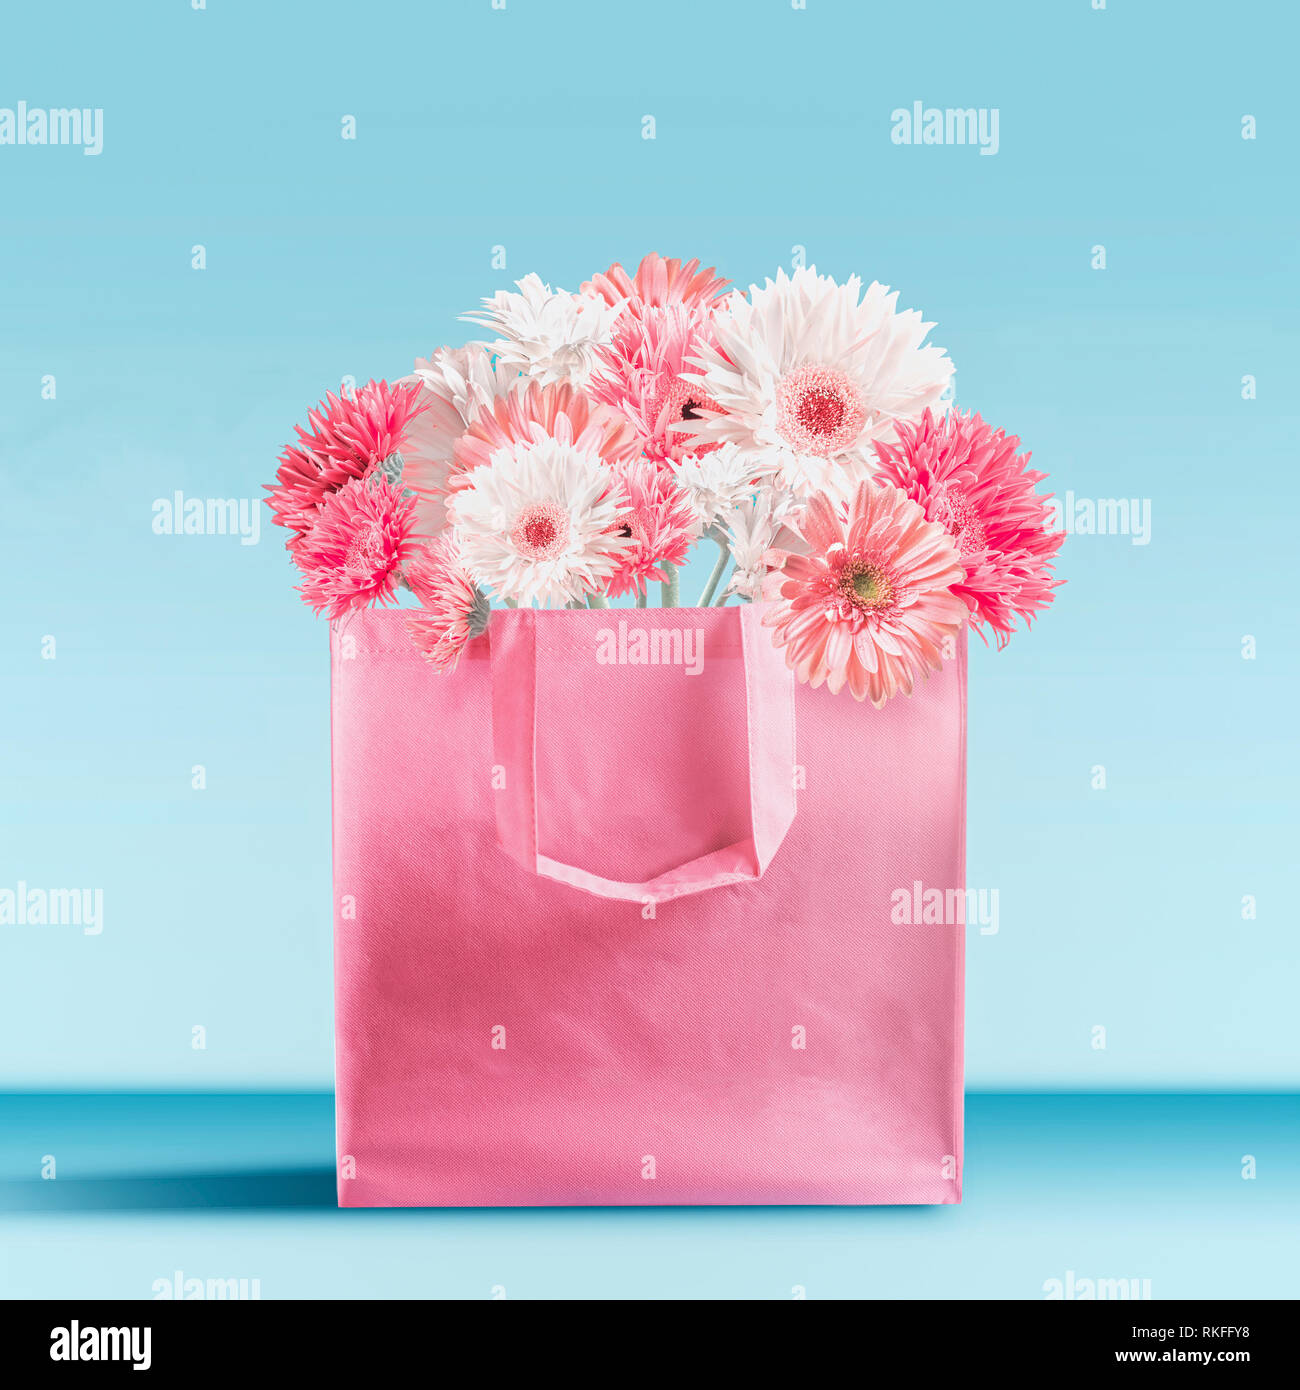 Pastel pink shopping bag with gerbera daisies flowers bunch standing on table at turquoise blue wall background. Branding mock up. Copy space. Summer  Stock Photo